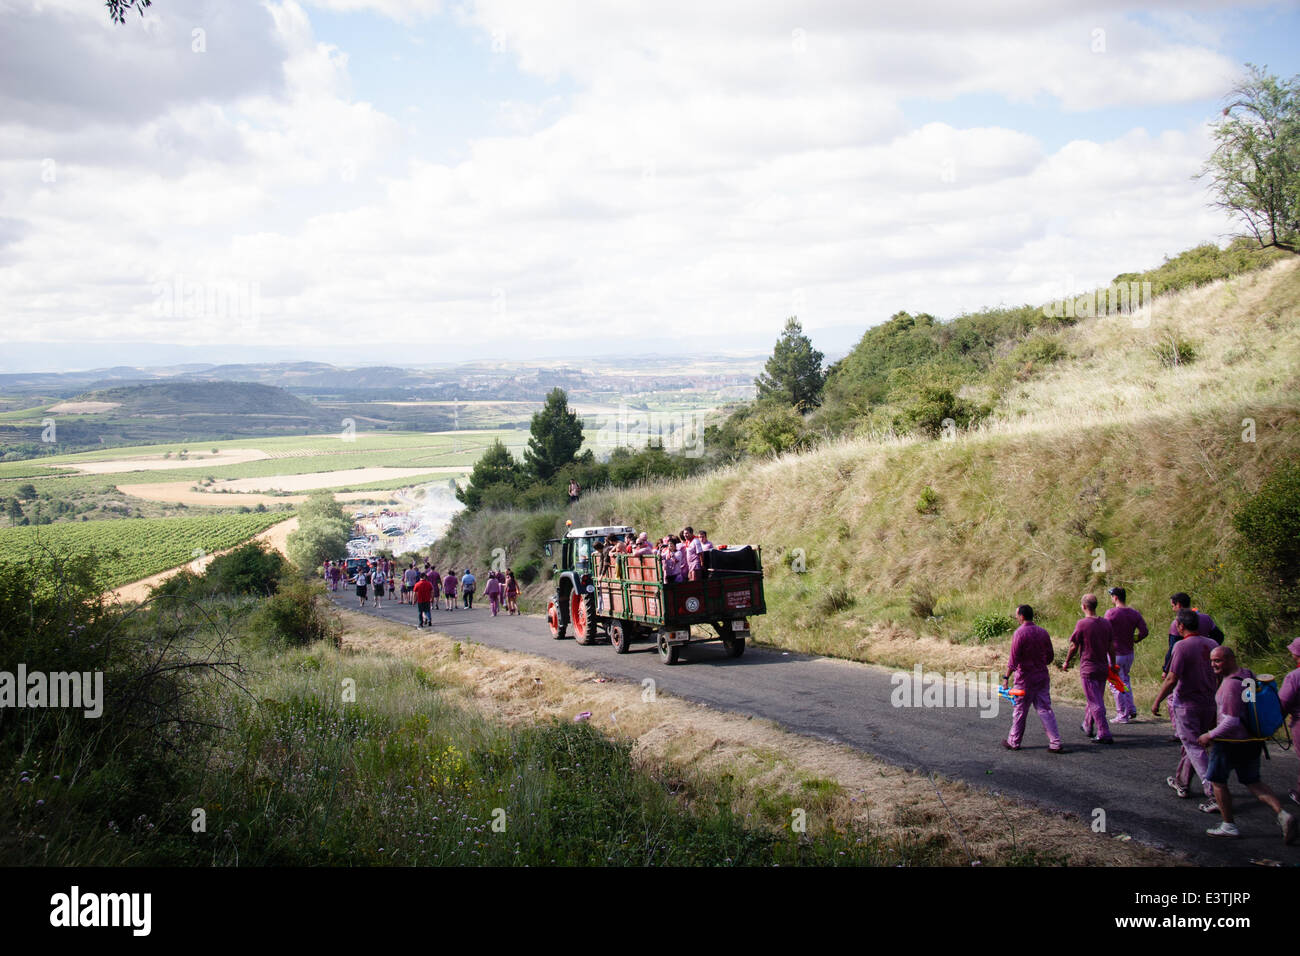 Riscos de Bilibio, Haro, La Rioja, Spain. 29 June 2014. Revellers at Haro Wine Battle held annually on St Peter's Day. The battle sees thousands of people climb a mountain near the town of Haro and poor wine over each other. Haro is at the heart of the Rioja wine region. In 2013 35% of Rioja exports were destined for the UK. Credit:  James Sturcke/Alamy Live News Stock Photo